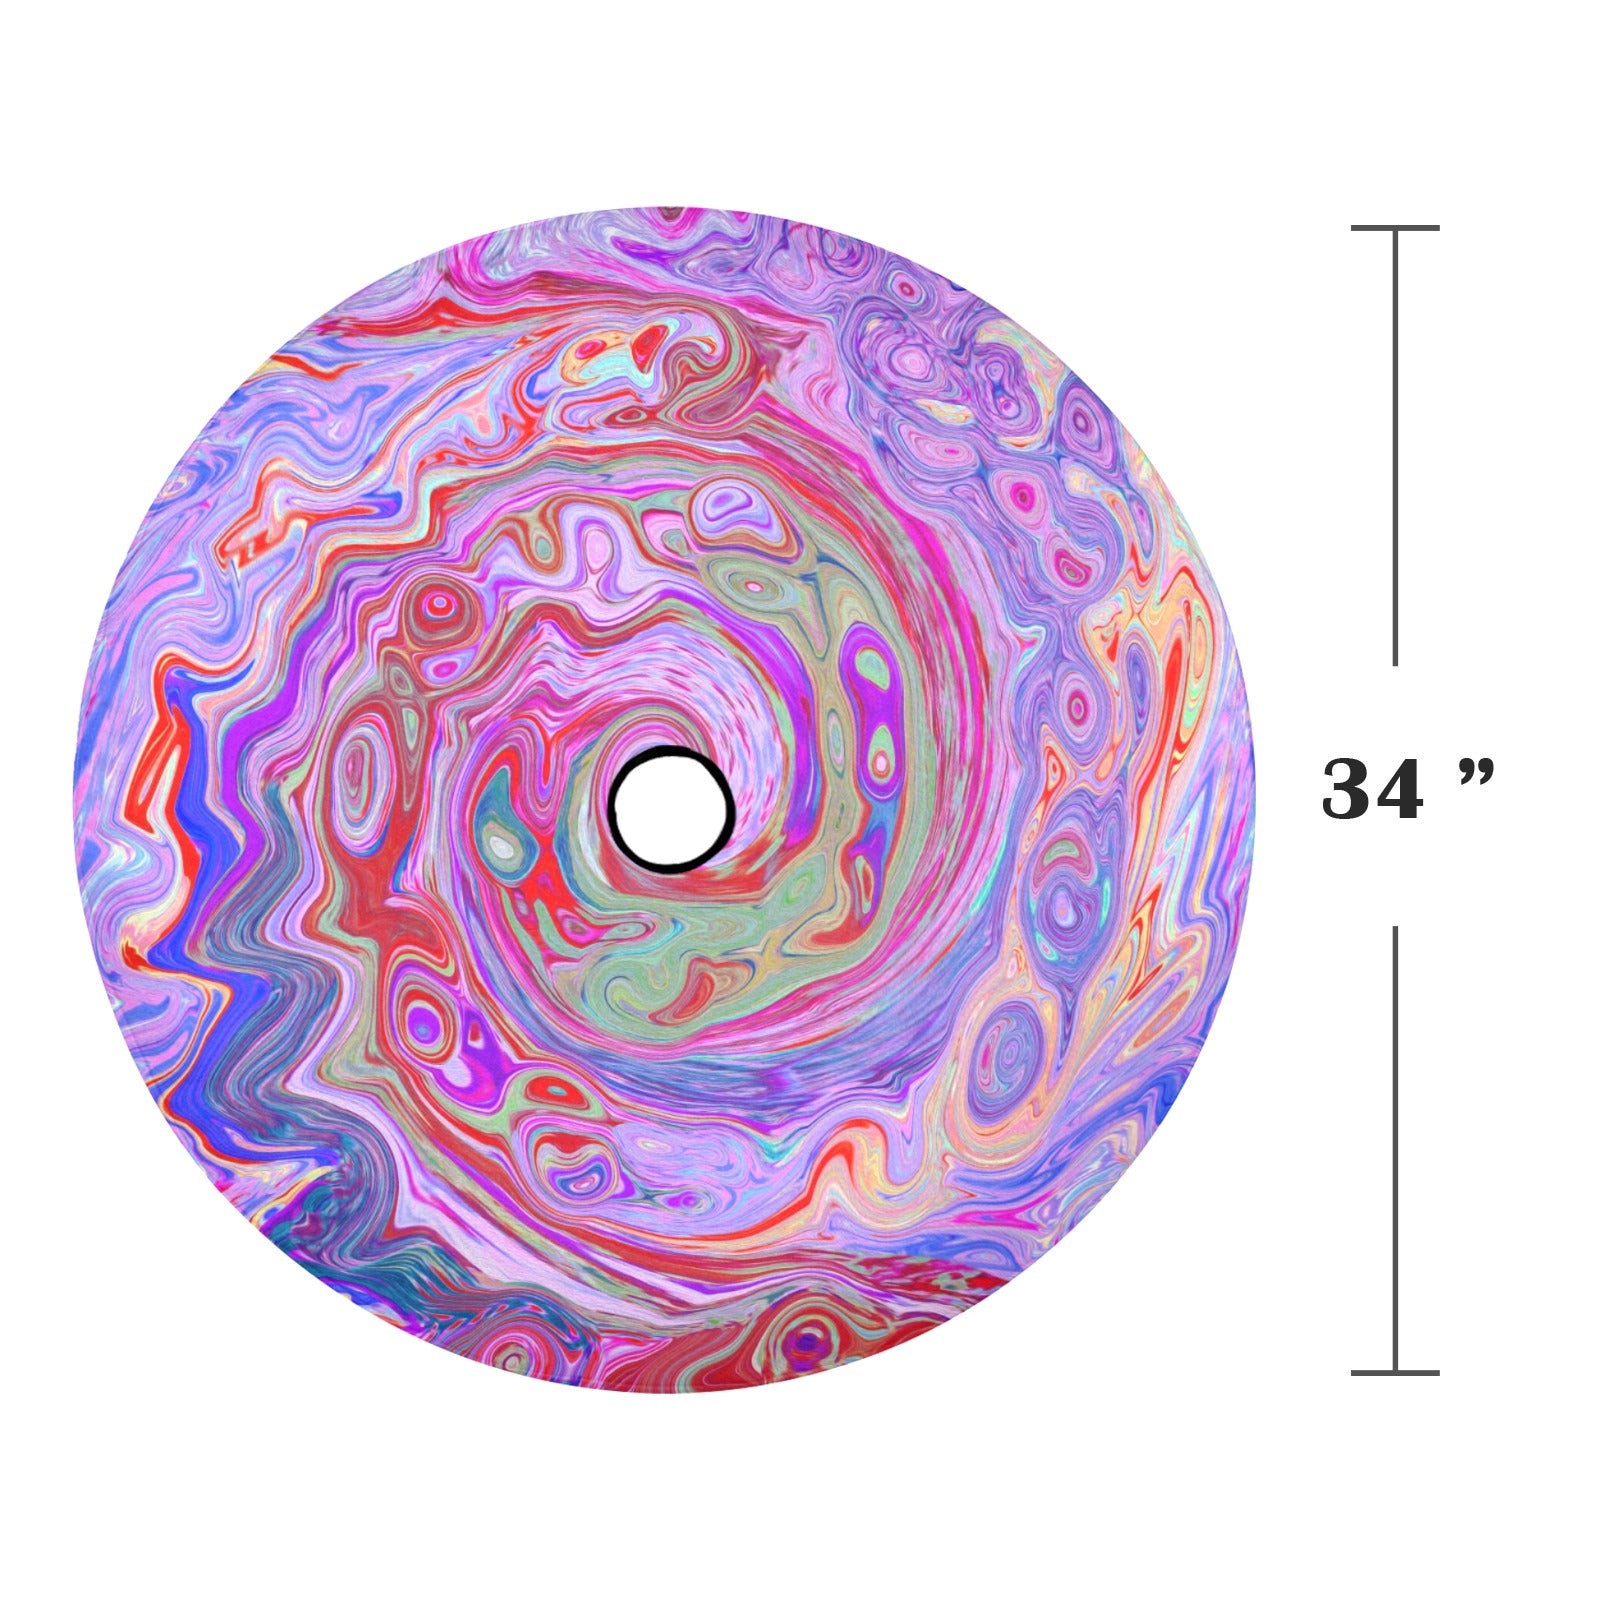 Spare Tire Cover with Backup Camera Hole - Groovy Abstract Retro Red, Purple and Pink Swirl - Large